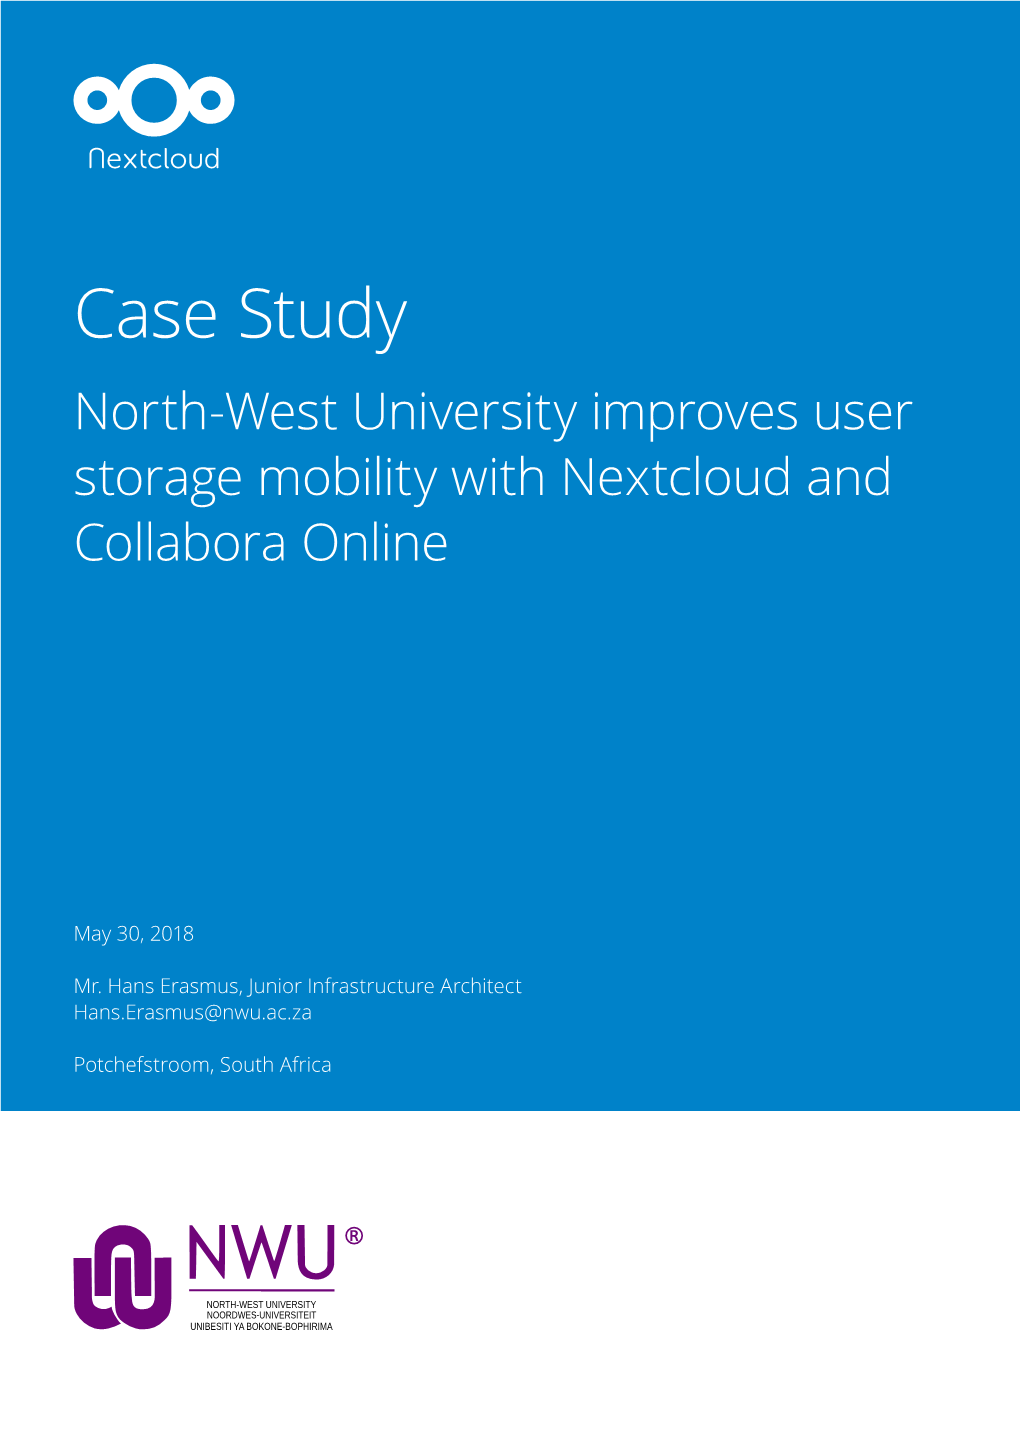 Case Study North-West University Improves User Storage Mobility with Nextcloud and Collabora Online